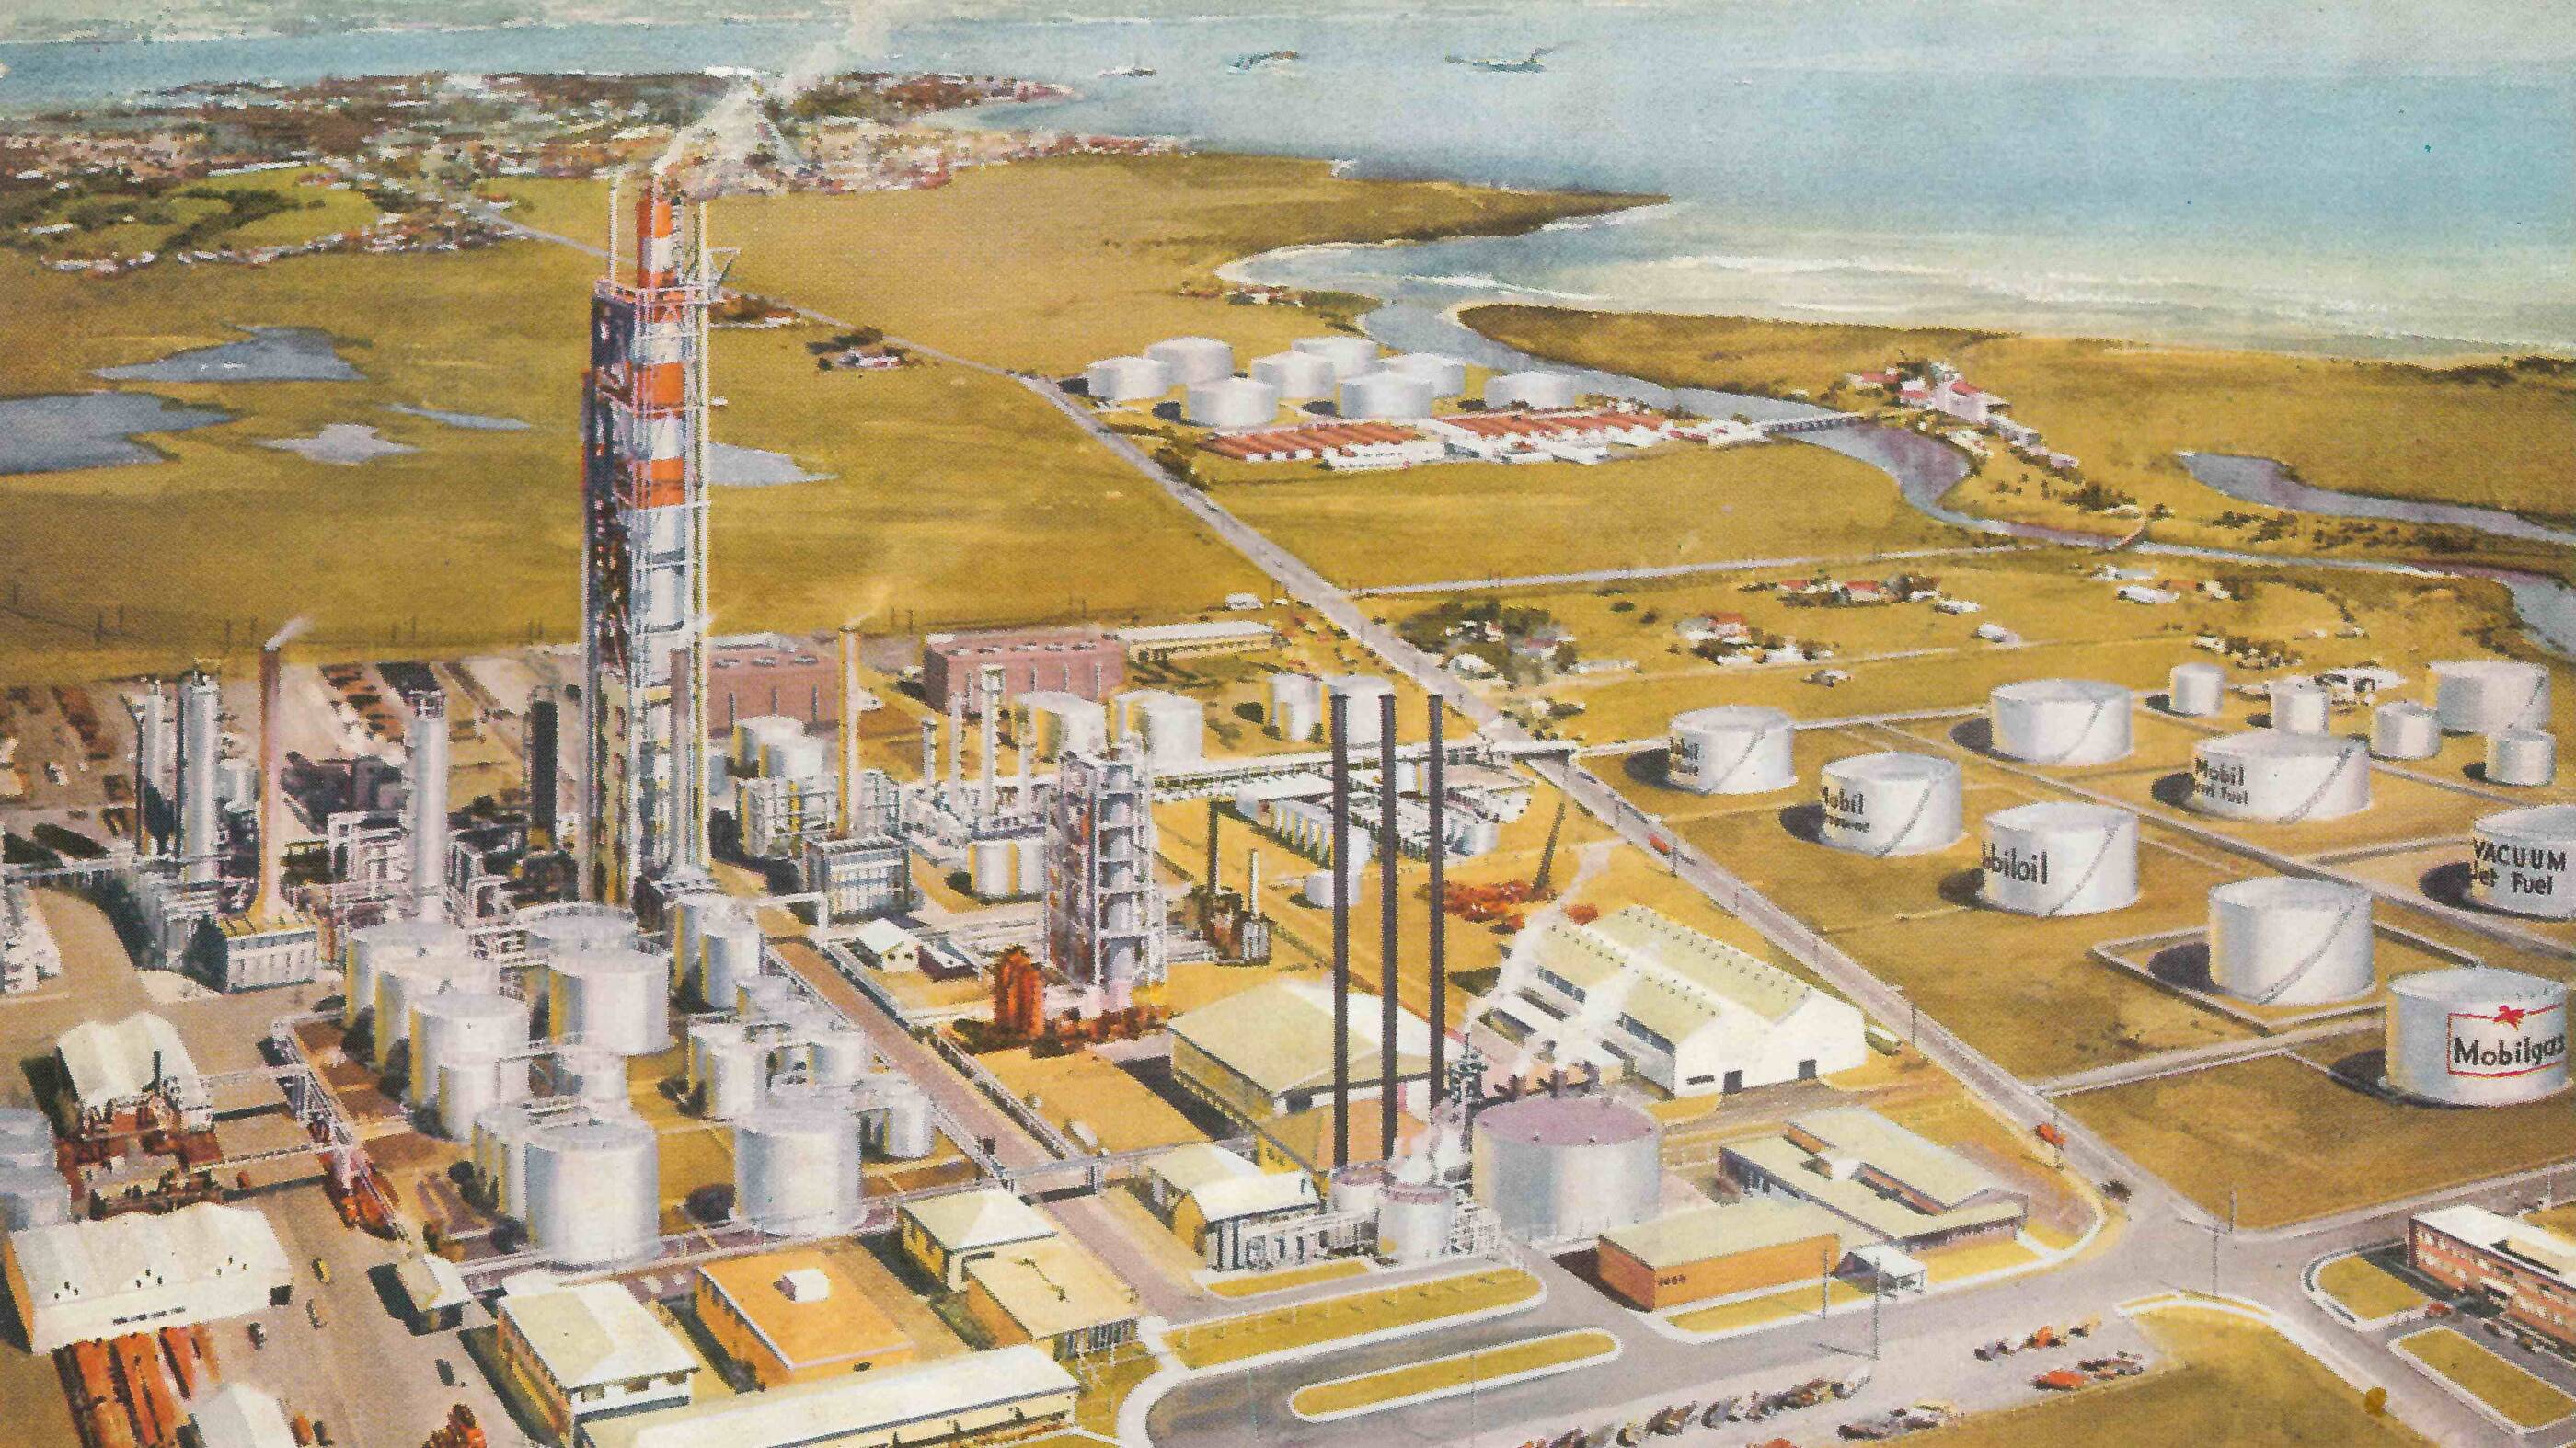 Image Photo The TCC towers above the landscape in this C Dudley Wood painting of the Altona Refinery in the 50s.